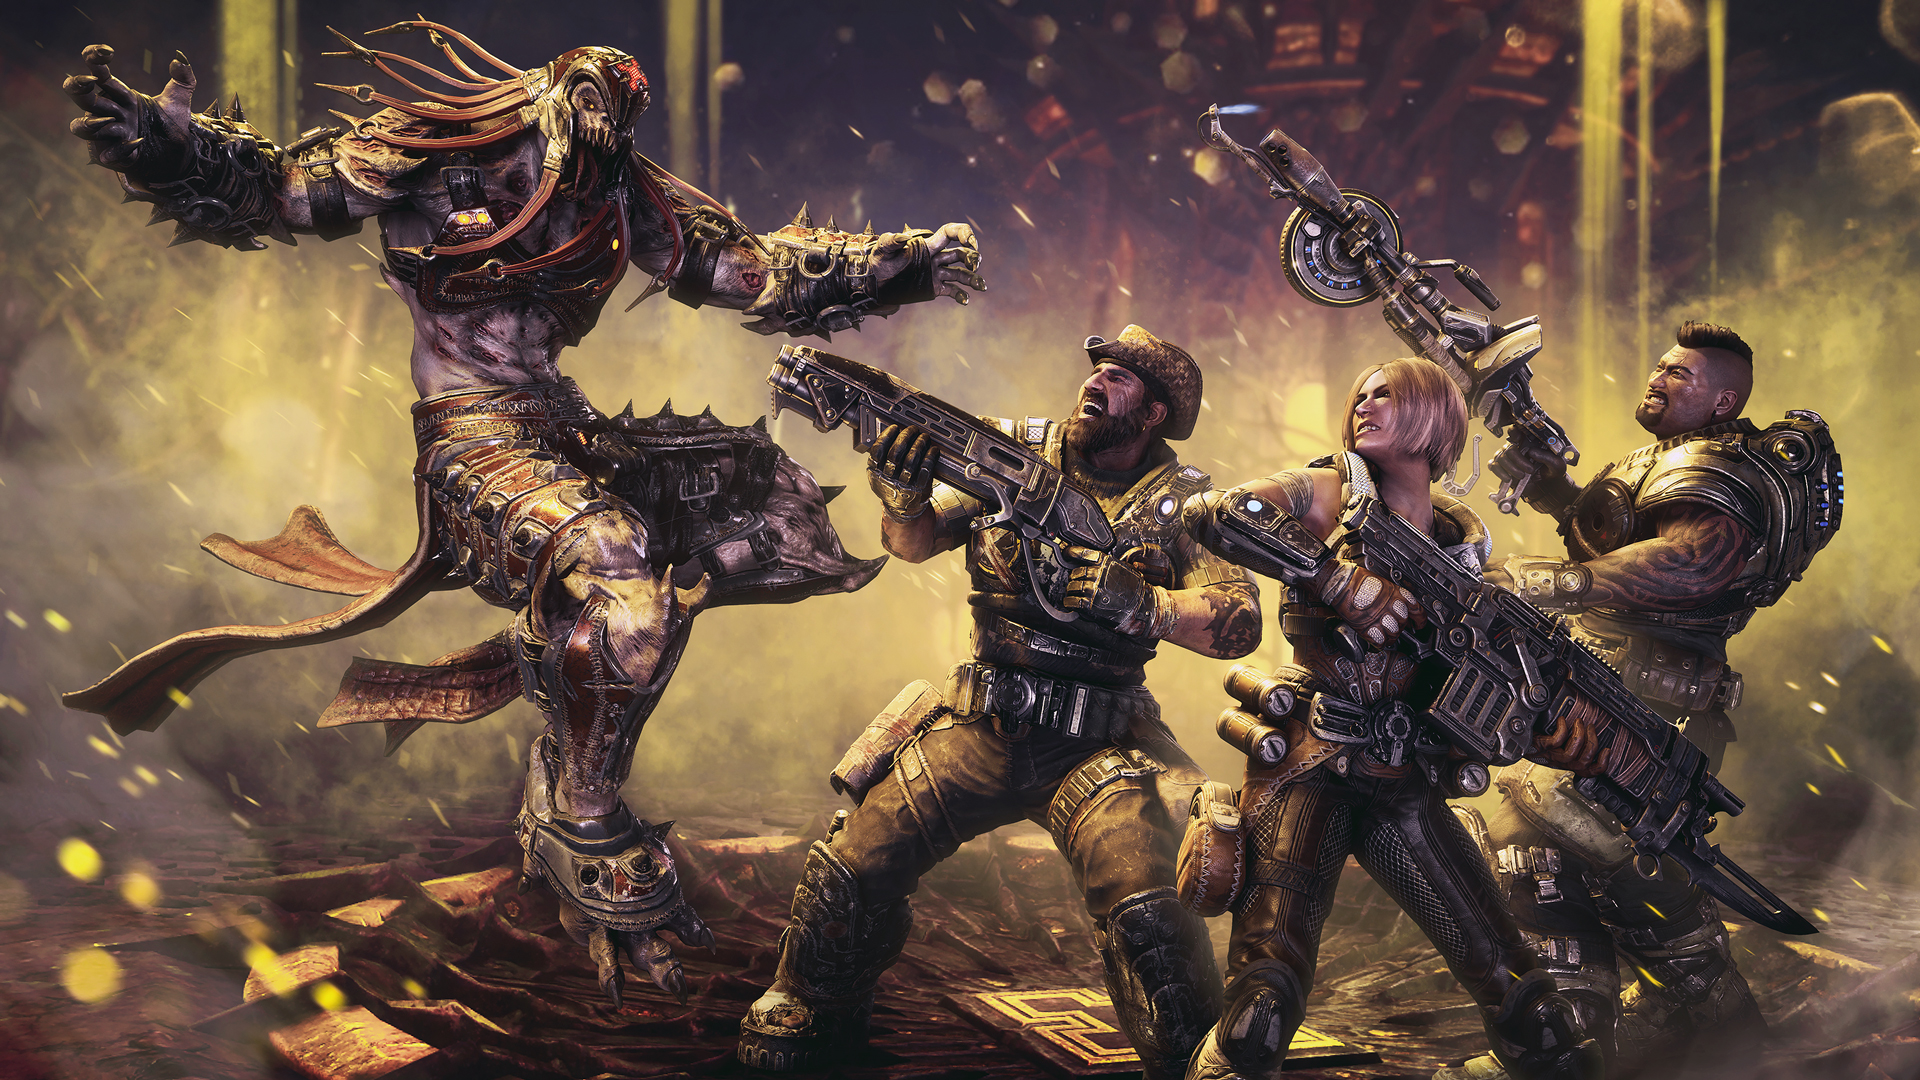 How Long Does It Take To Beat Gears 5: Hivebusters?